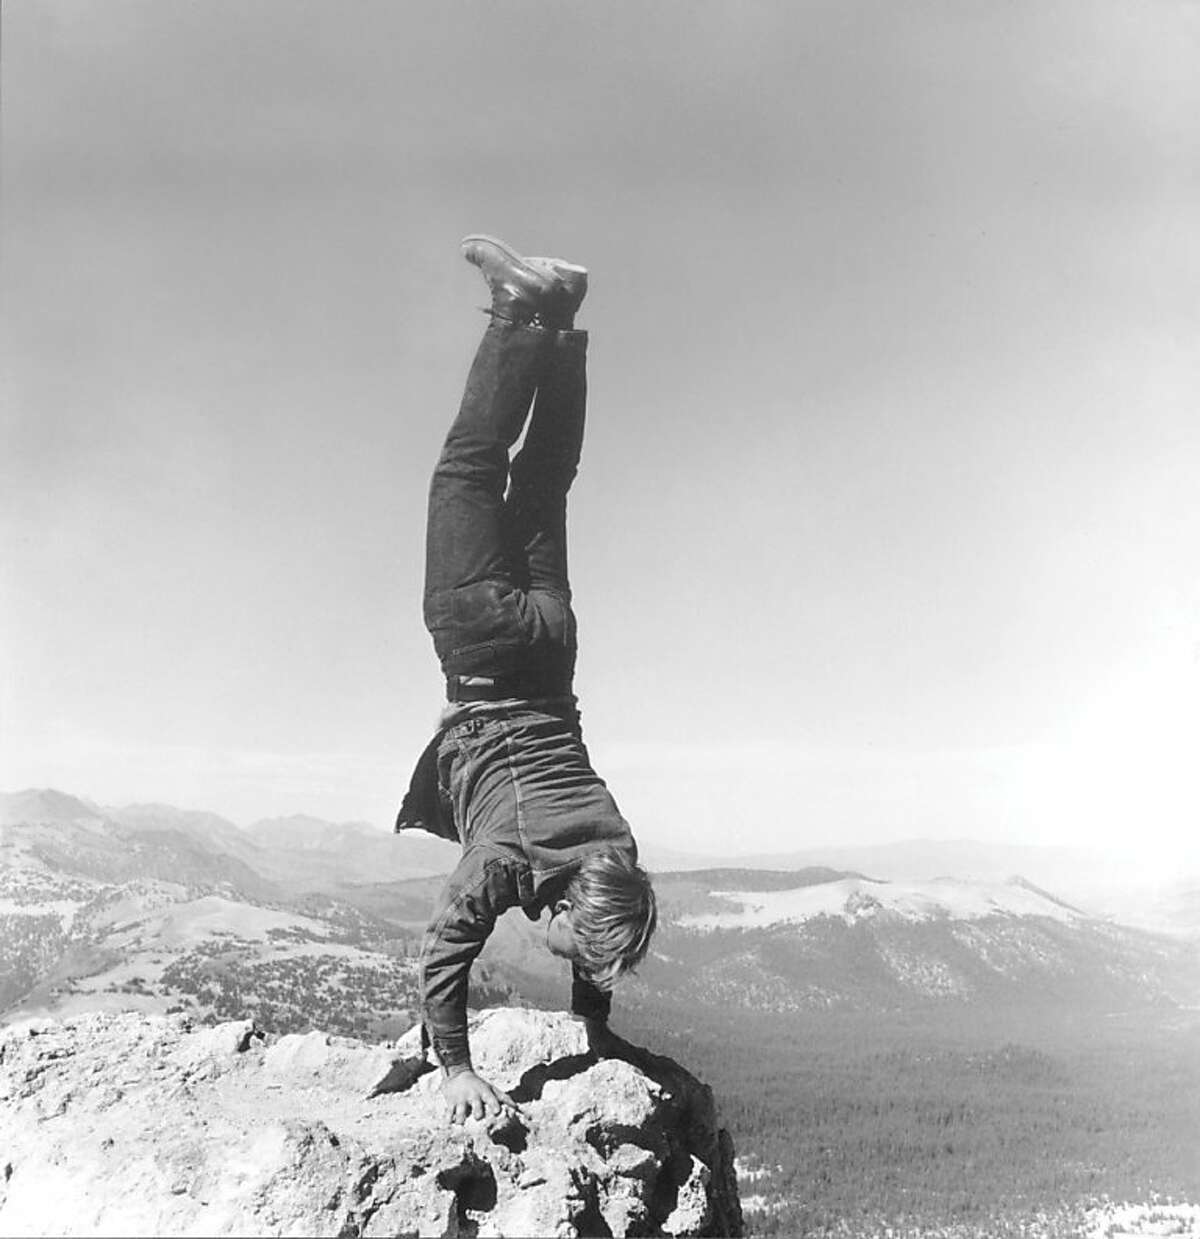 "8 Natural Handstands" (1969/2009) by Robert Kinmont (1 of 9 black and white gelatin silver prints: performance photographs)